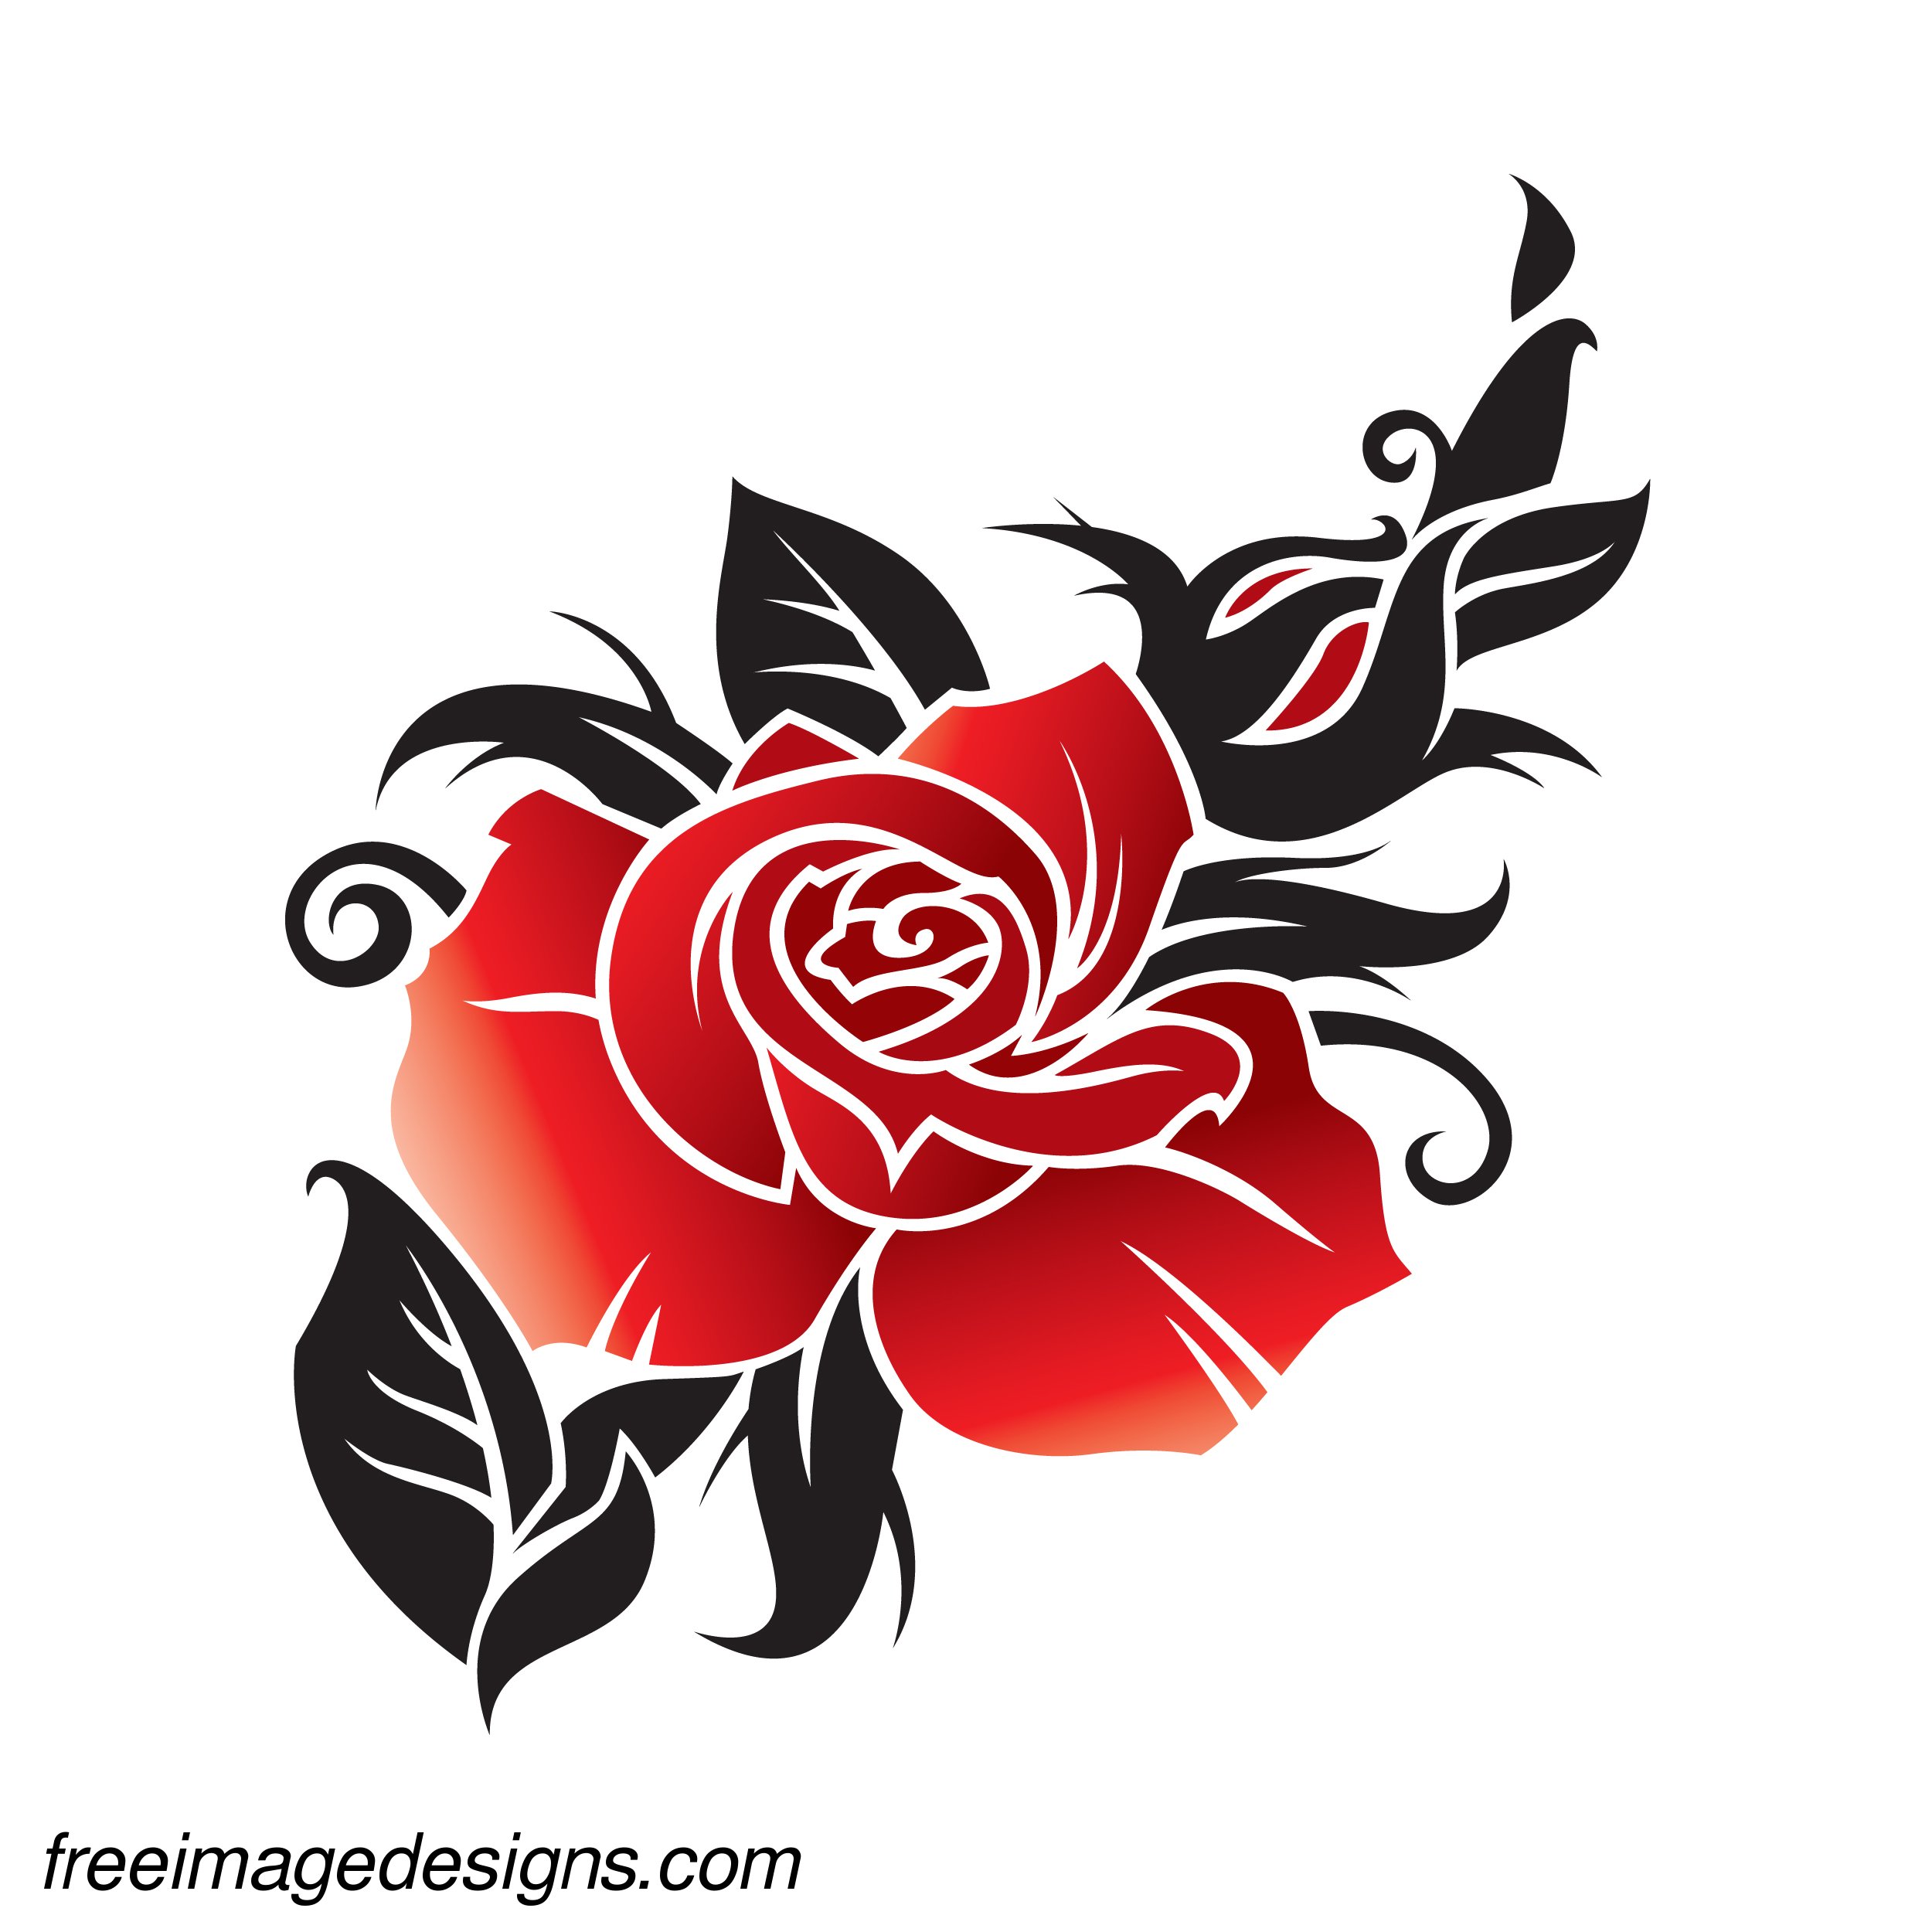 Black and Red Flower Floral Design Download Free Image Tattoo ...